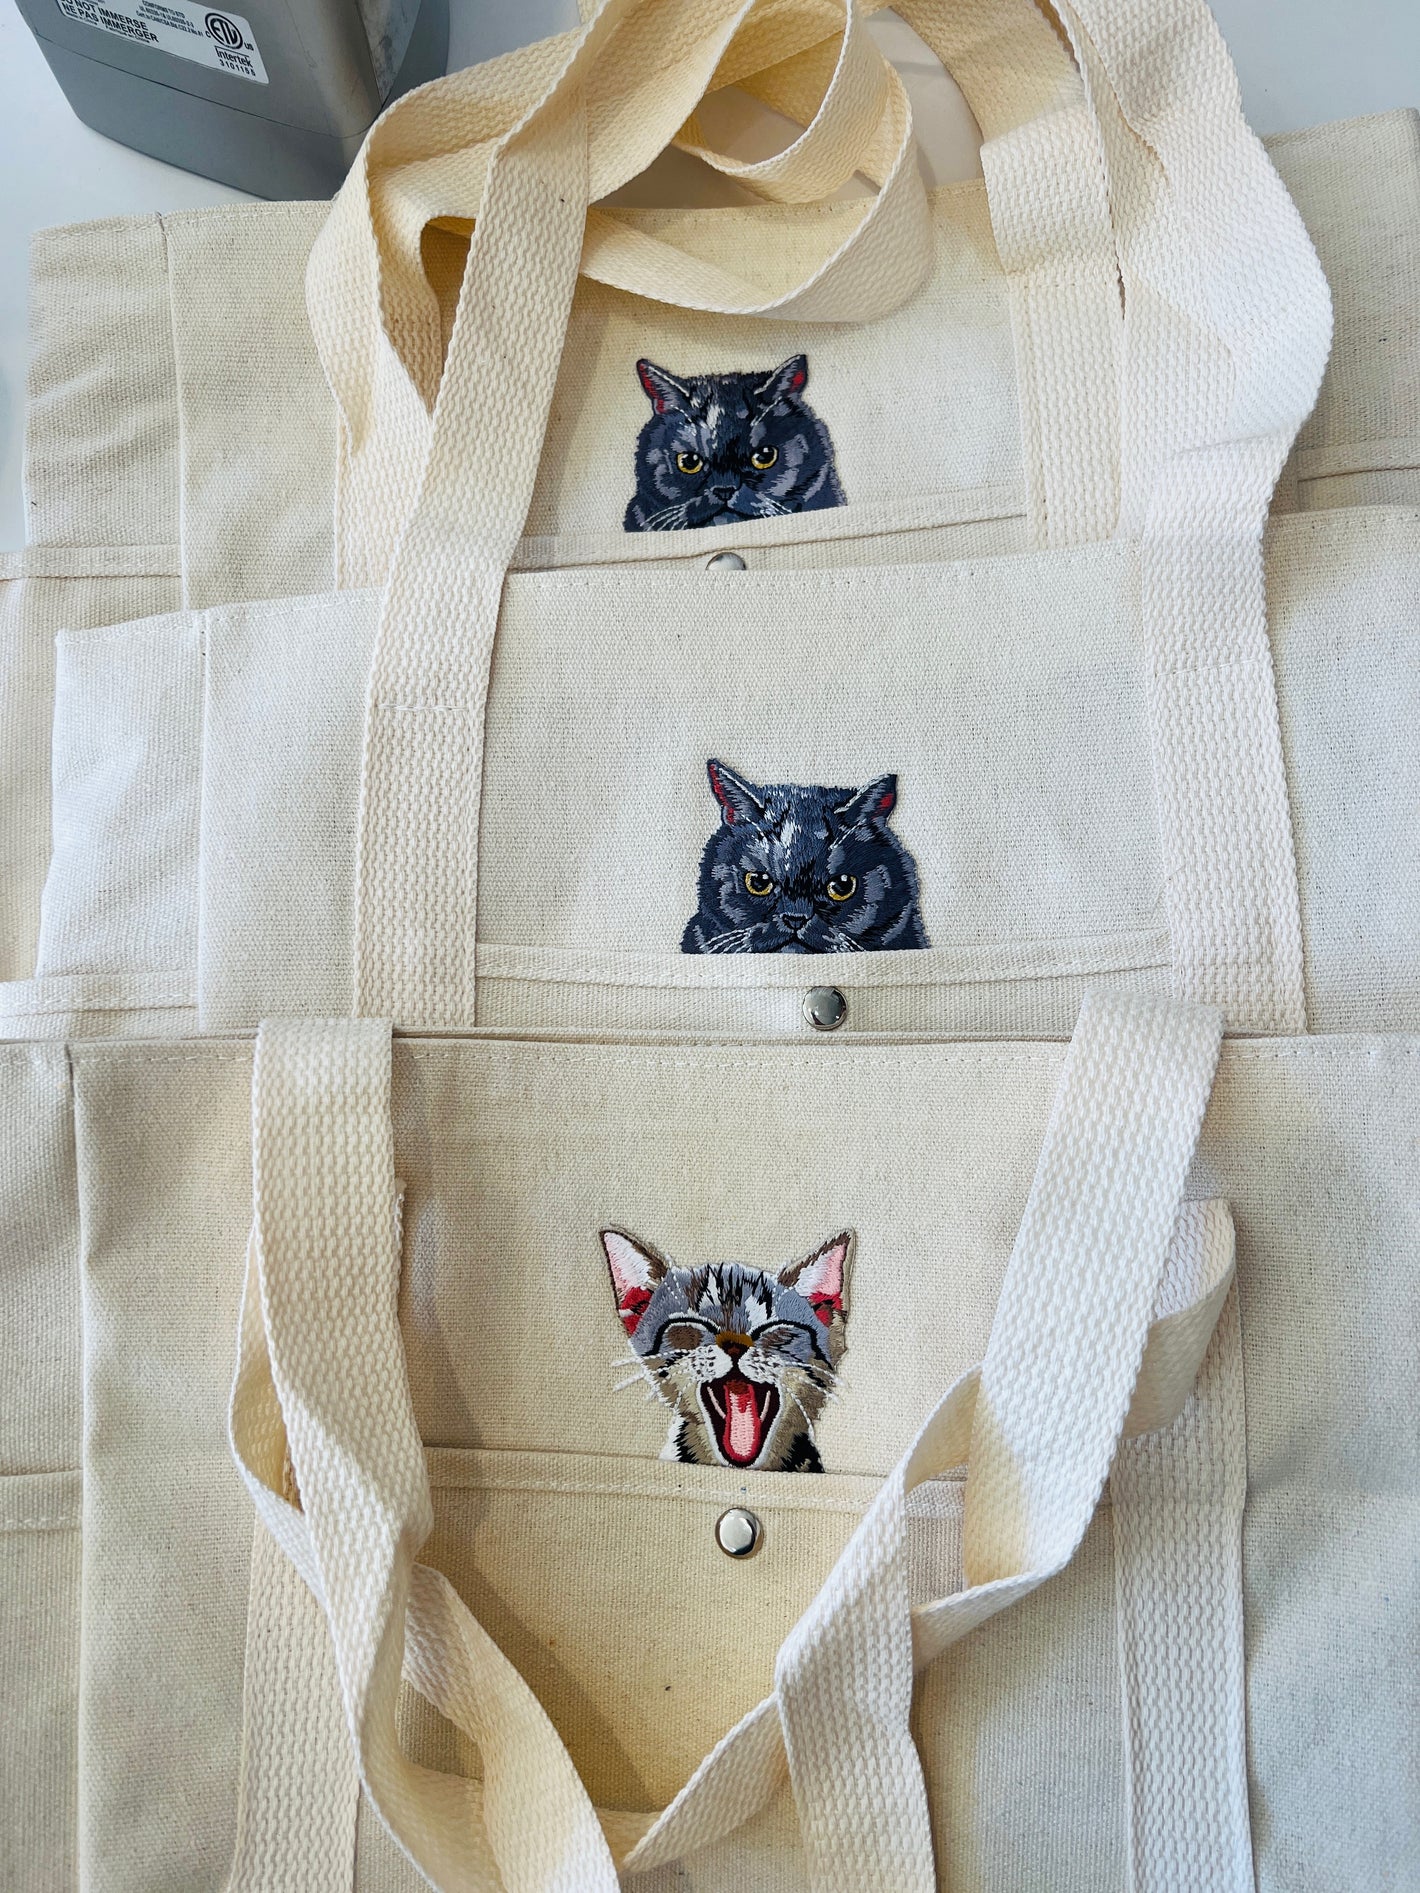 The cat patch tote by The Crowd Went Wild